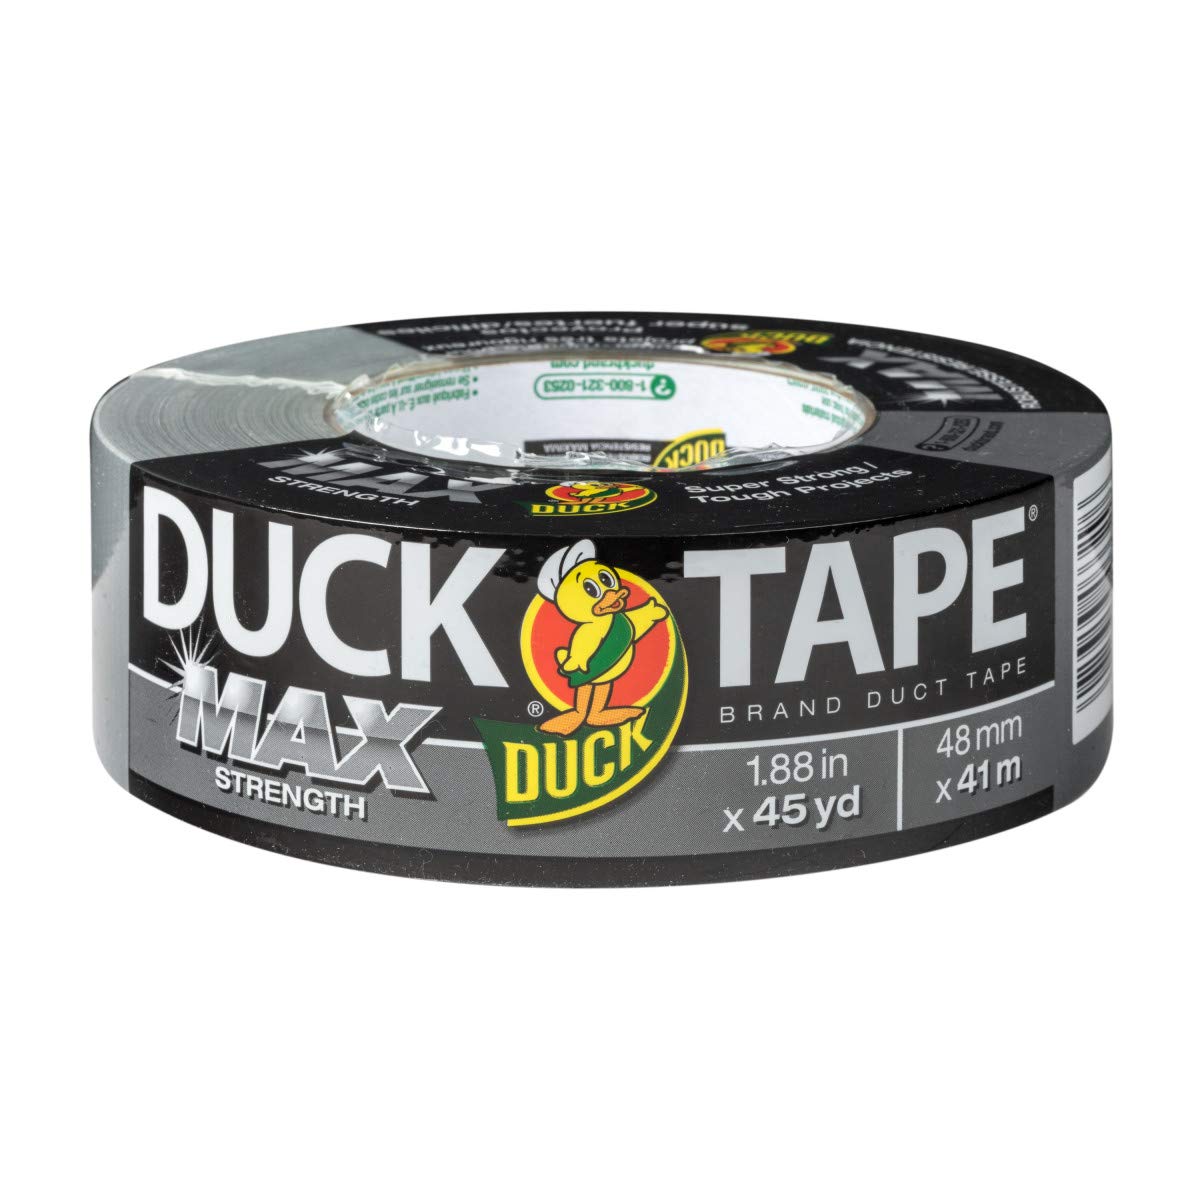 Duck Brand Max Strength Duct Tape, Silver, 1-Roll Pack, 1.88 Inch x 45 Yards, 240201